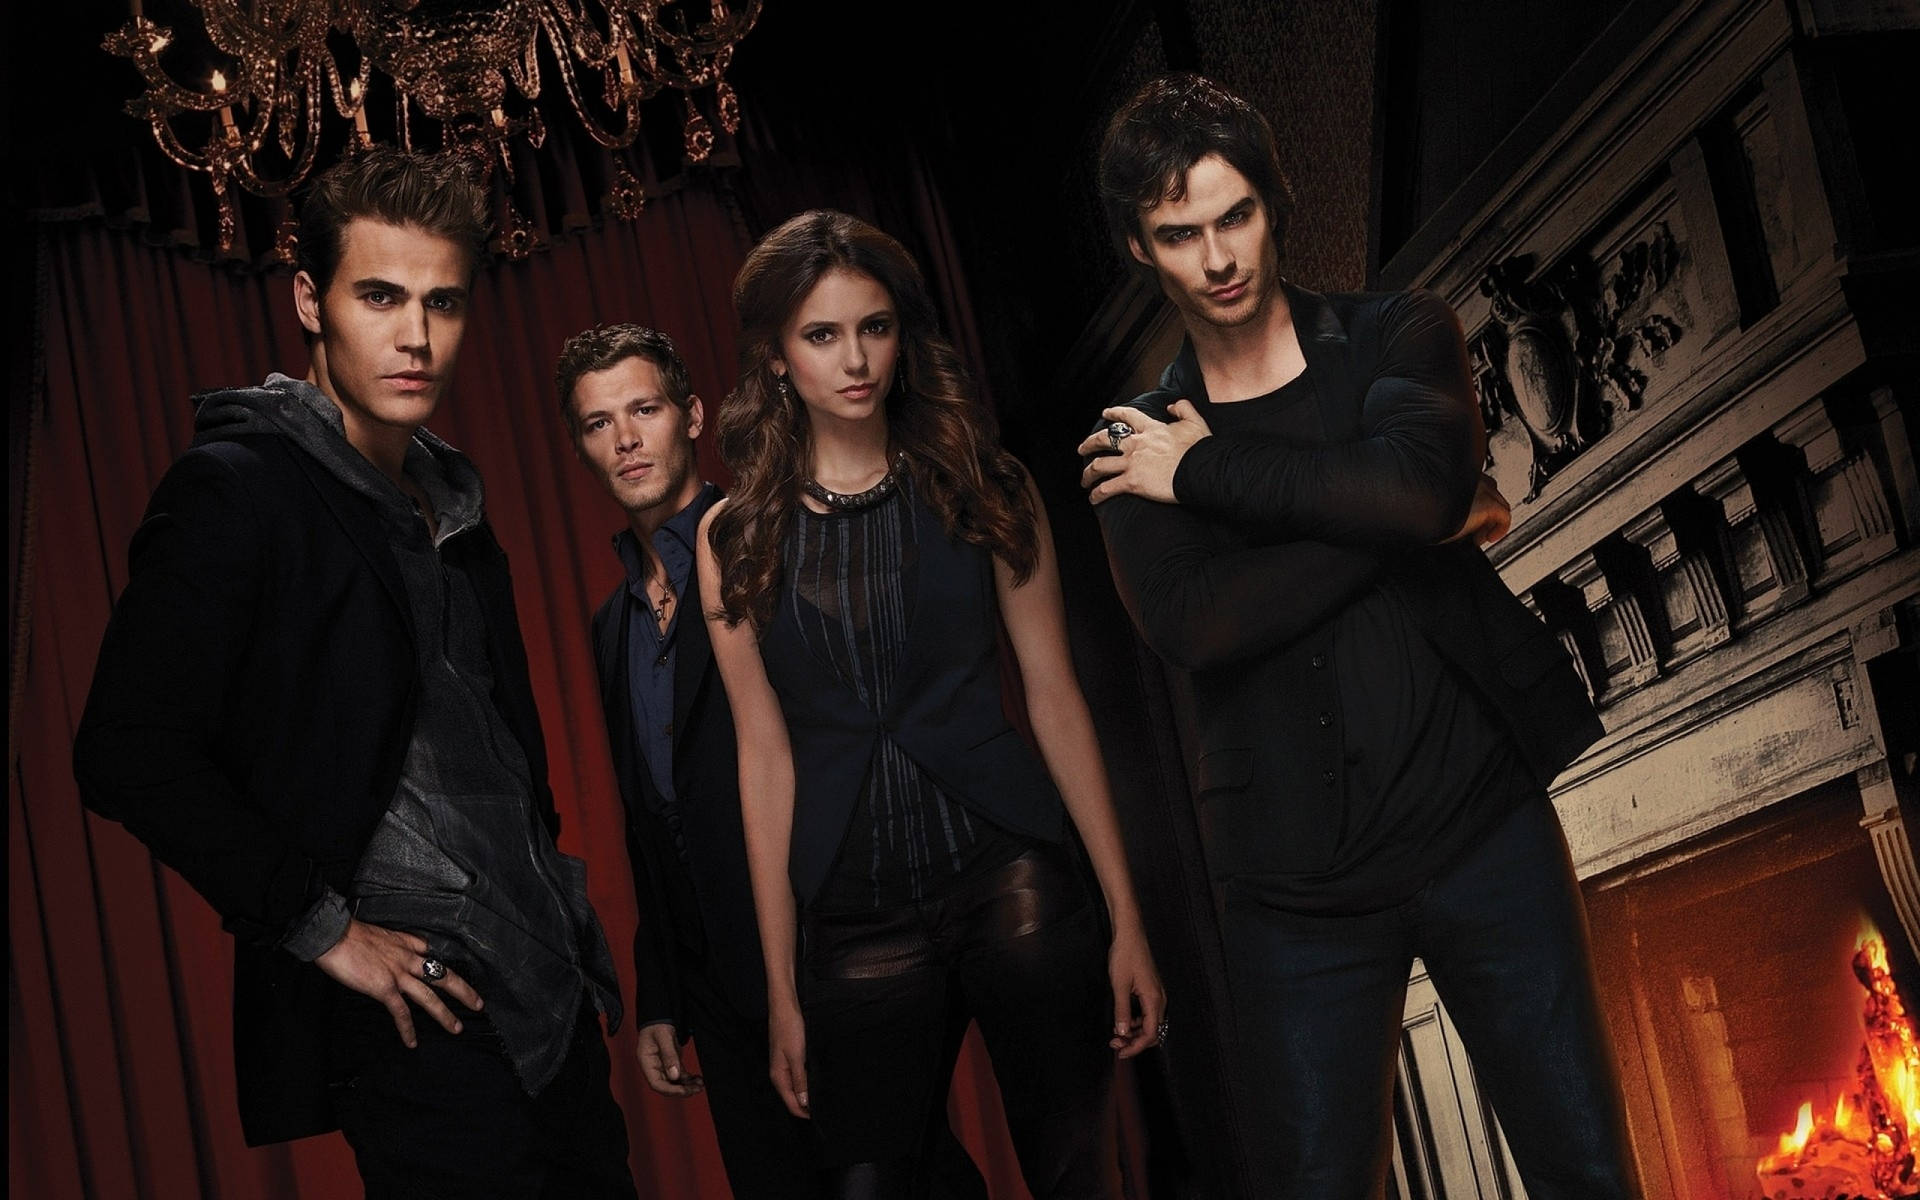 The Vampire Diaries Cast In Old Vintage Study